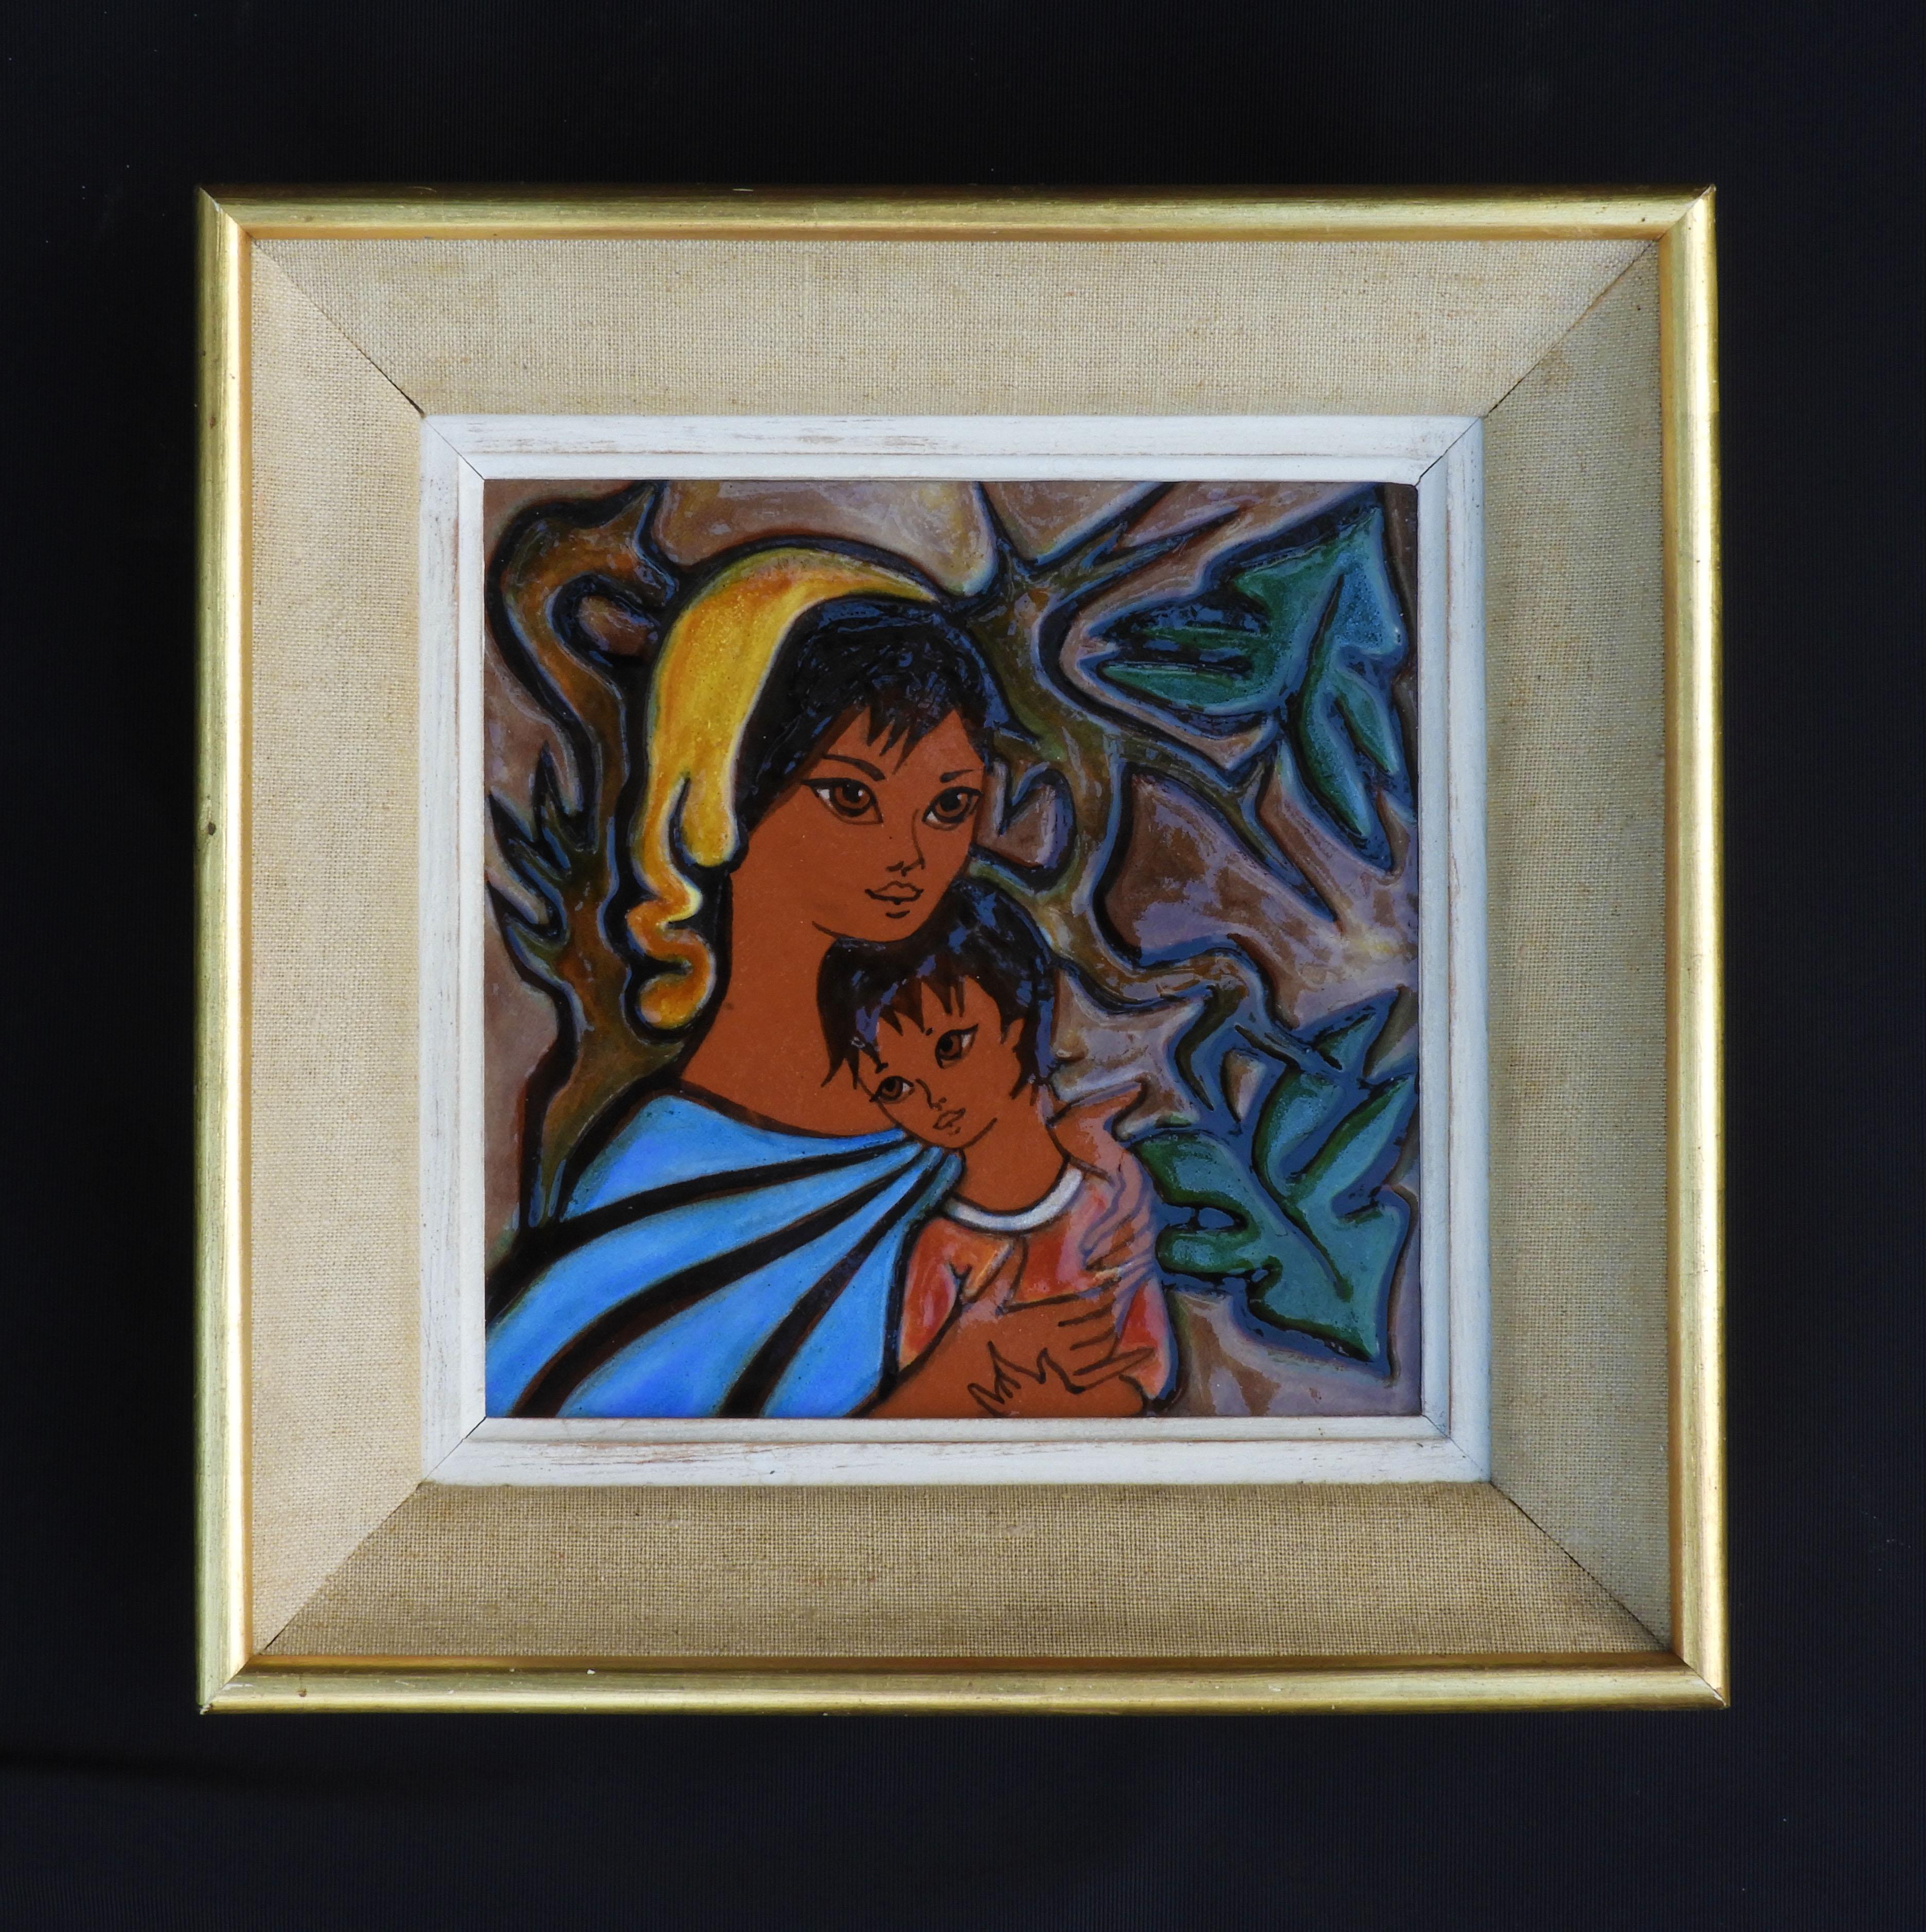 Hand-Painted Madonna and Child Mid-Century Ceramic Wall Art C1950.  Beautiful colourful and tender rendering of the Madonna and child.  Hand-painted, textured ceramic with a high gloss glaze. Artist unknown. Framed and ready to hang.  In very good